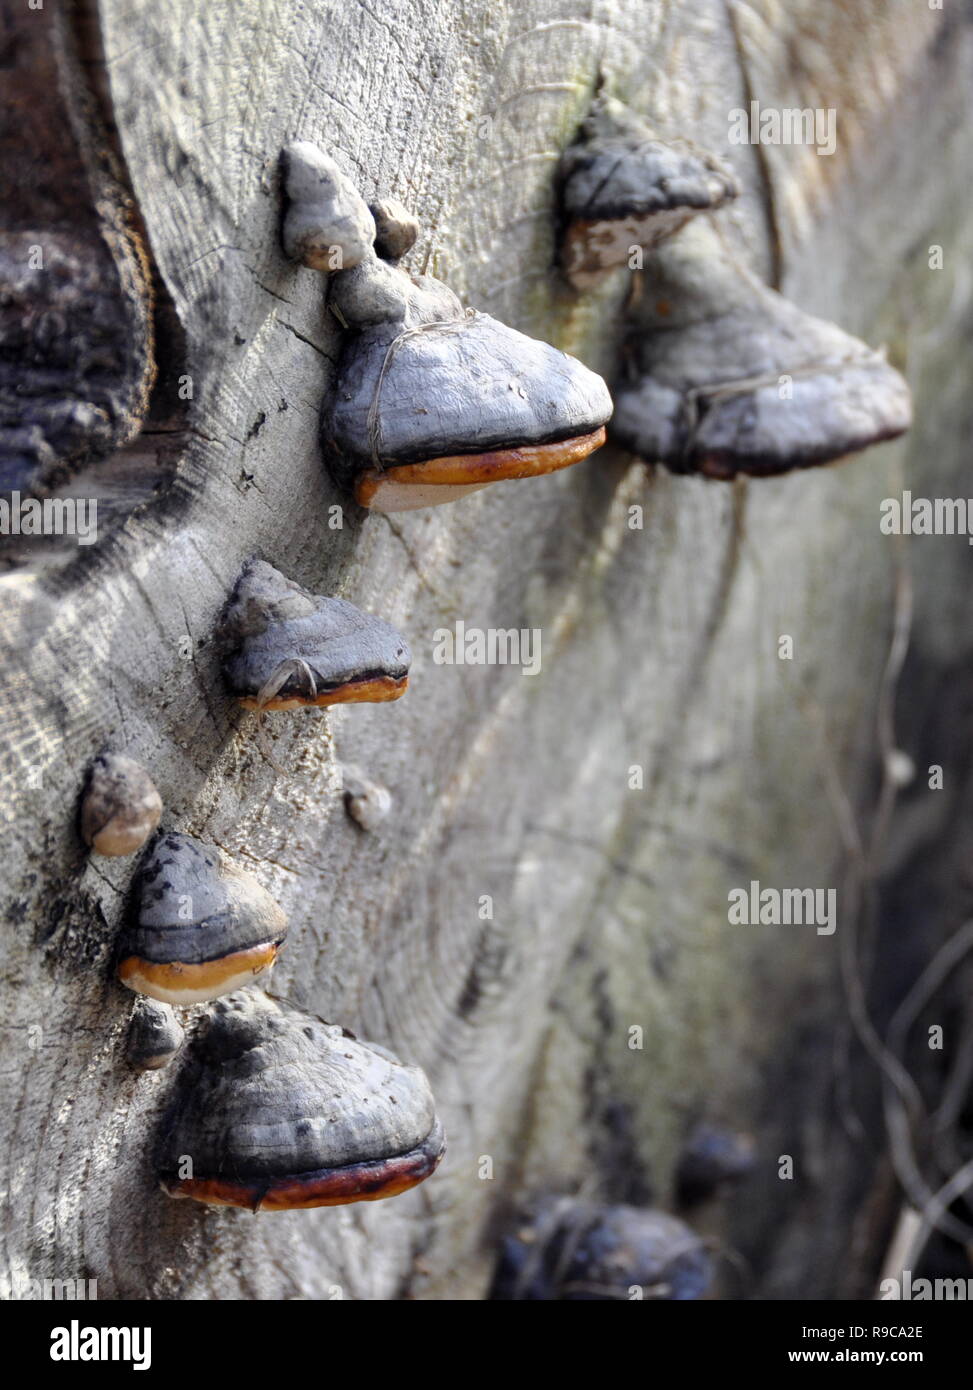 Red-belt conk Fomitopsis pinicola growing on a trunk Stock Photo